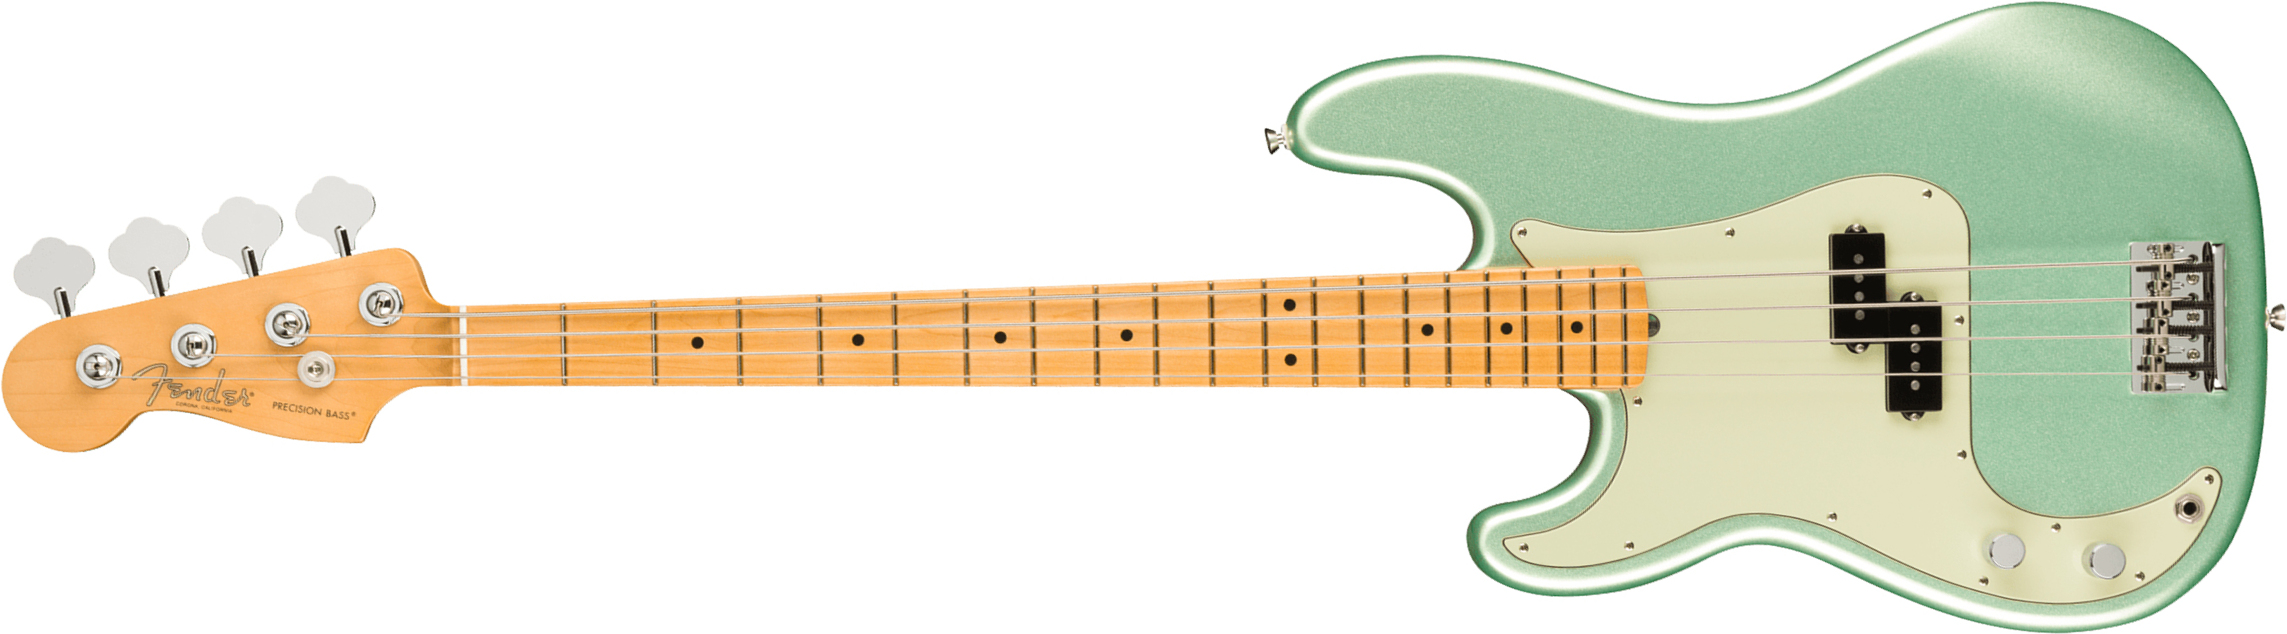 Fender Precision Bass American Professional Ii Lh Gaucher Usa Mn - Mystic Surf Green - Solid body electric bass - Main picture